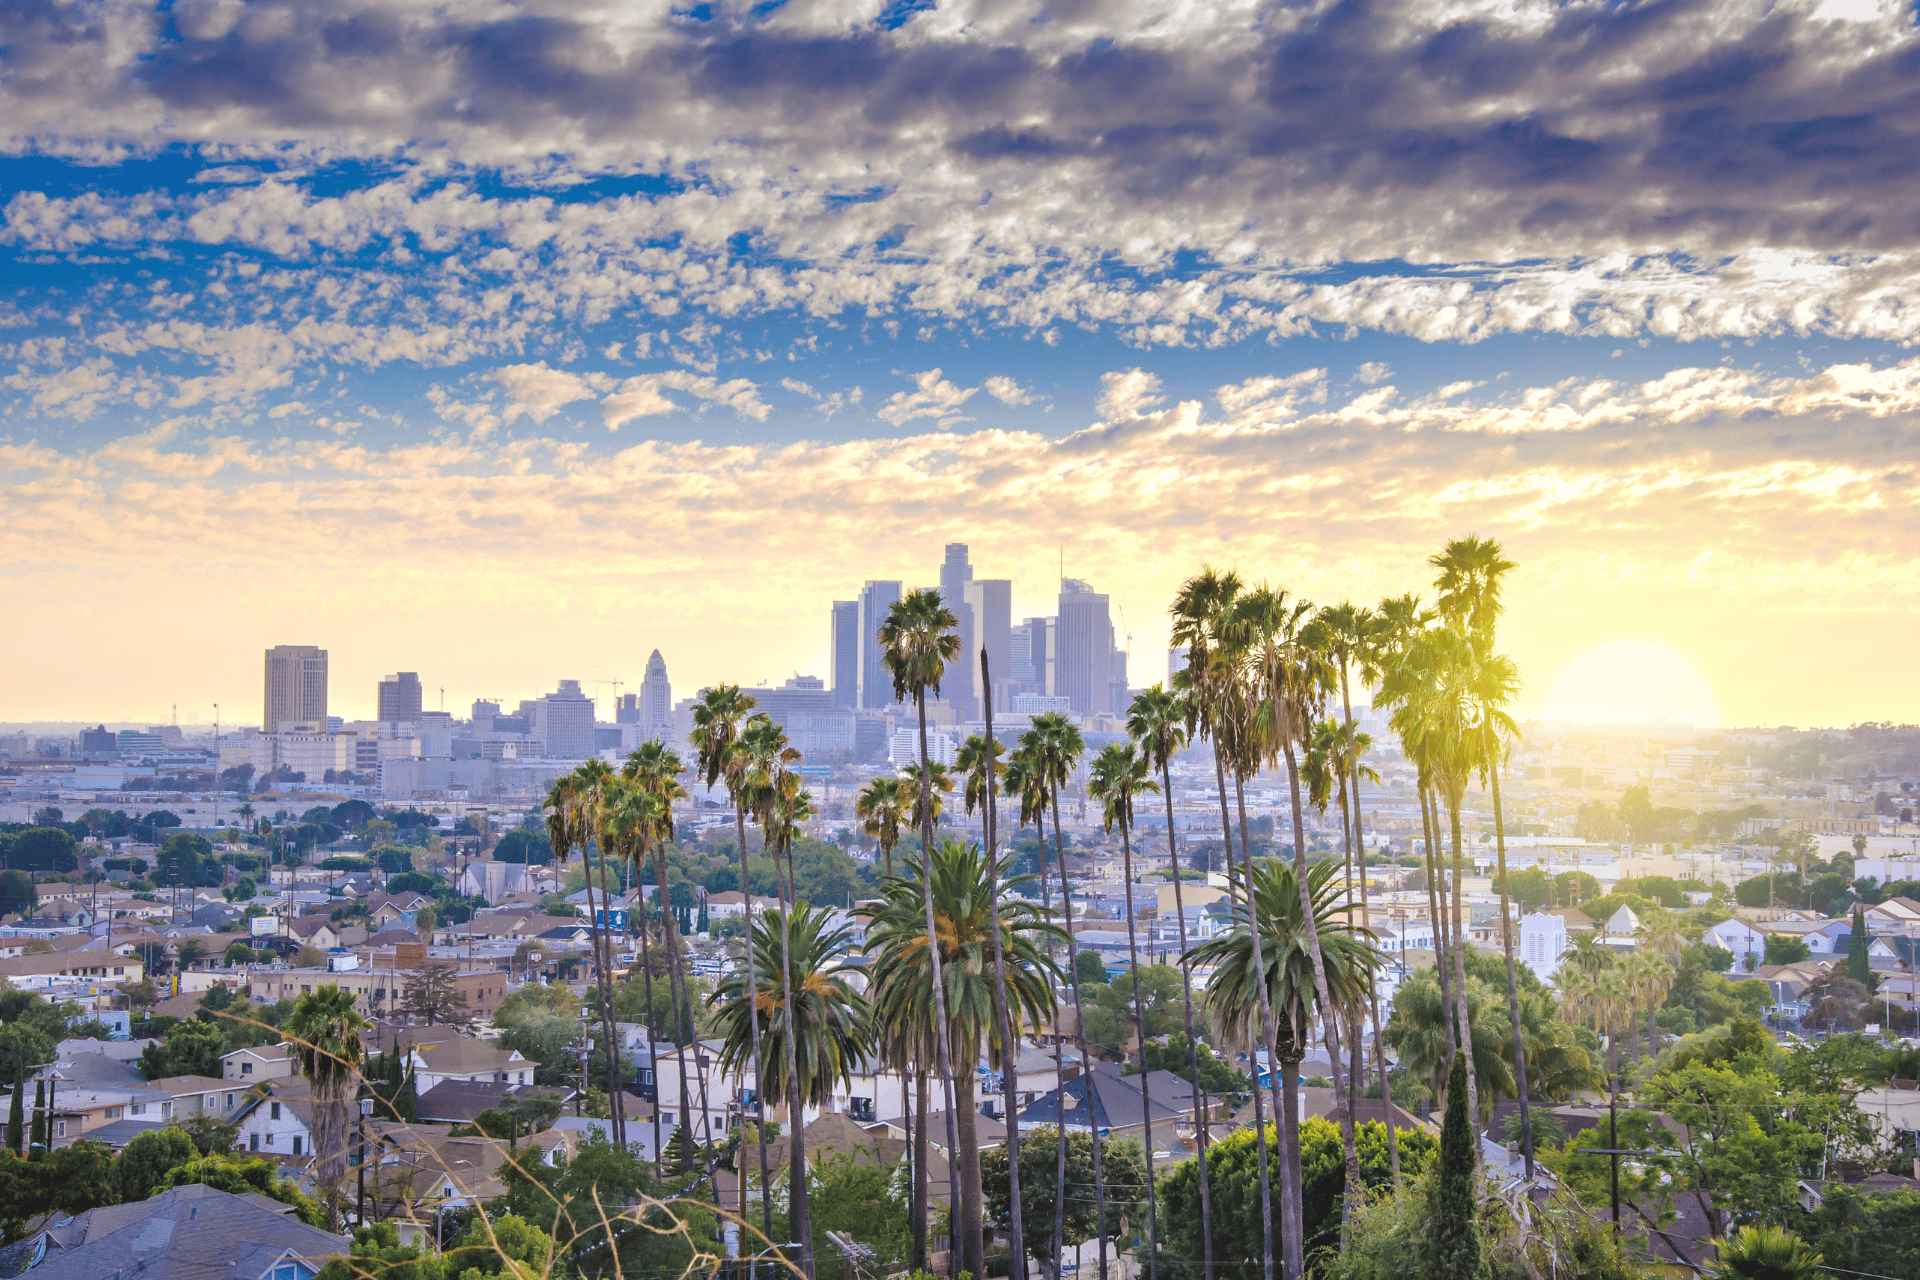 Los Angeles, Getty Images Pro